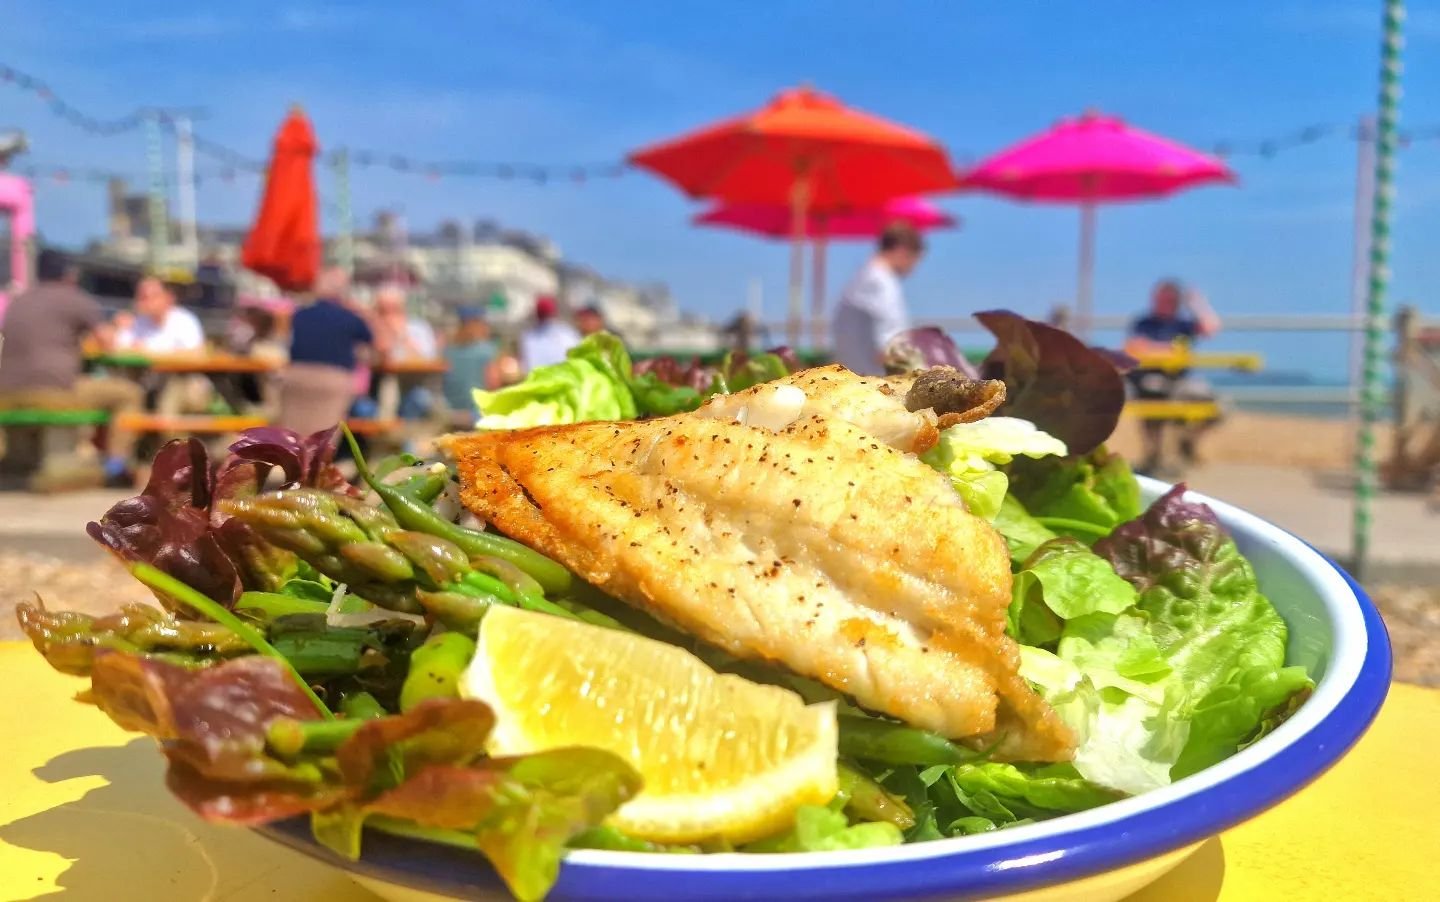 It's your build-up to summer SPECIALS 🌟 

THIS WEEKEND WE HAVE..

☆ Green Bean, Asparagus, Pickled Shallot &amp; Chilli Salad 🥗 

WITH EITHER:

☆ Our famous Grilled Plaice 🐟 

Or

☆ Very tasty Grilled Garlic Courgette (VG) 🧄 

Made from the fresh